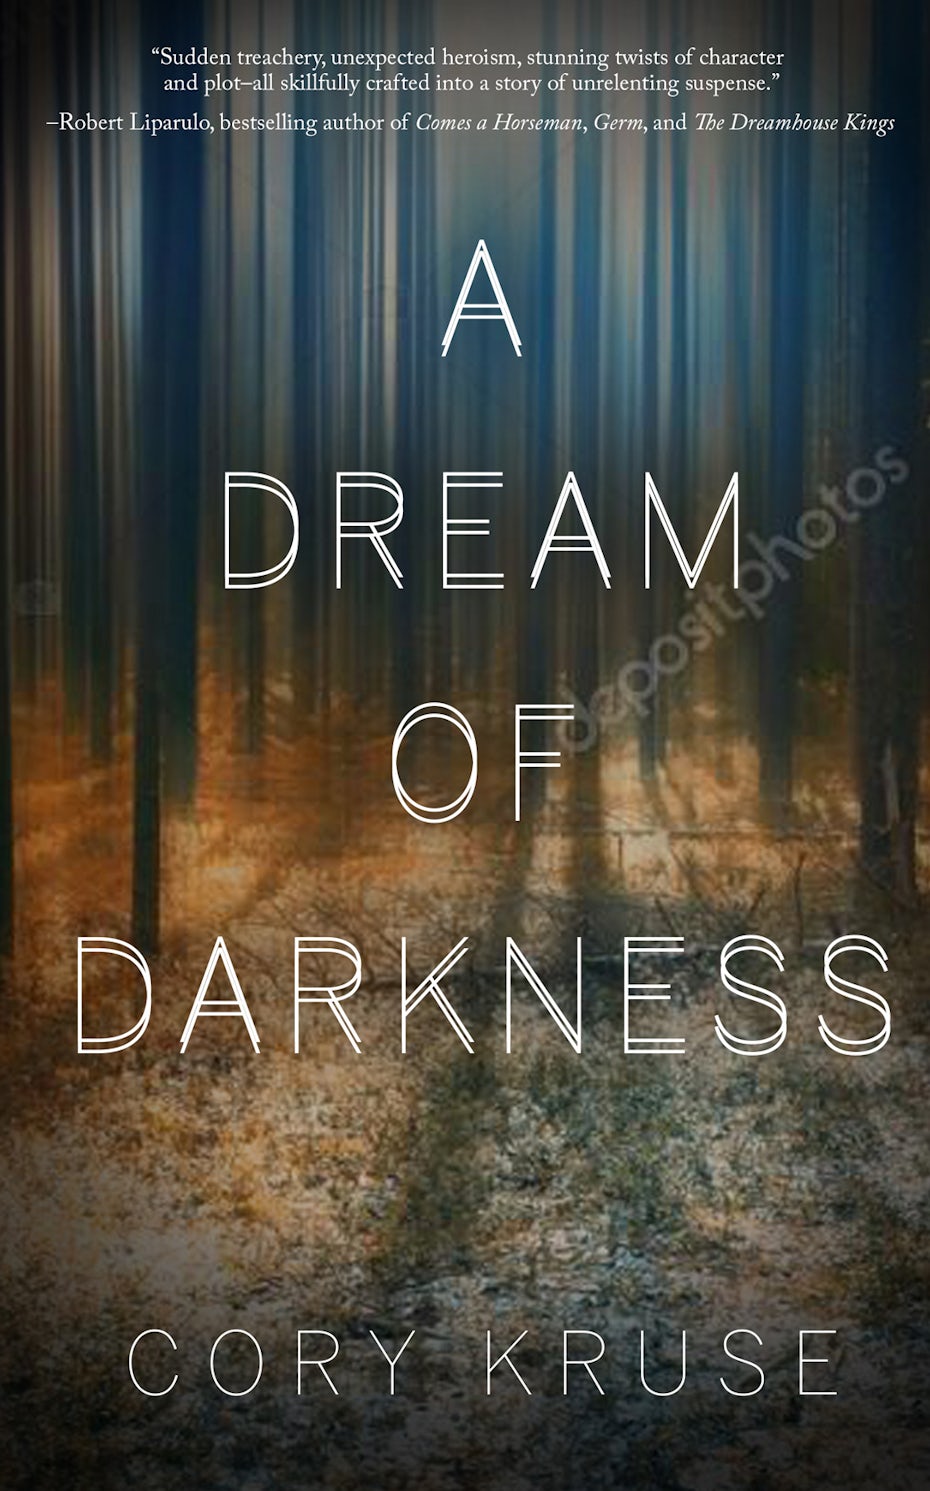 A dream of darkness book cover